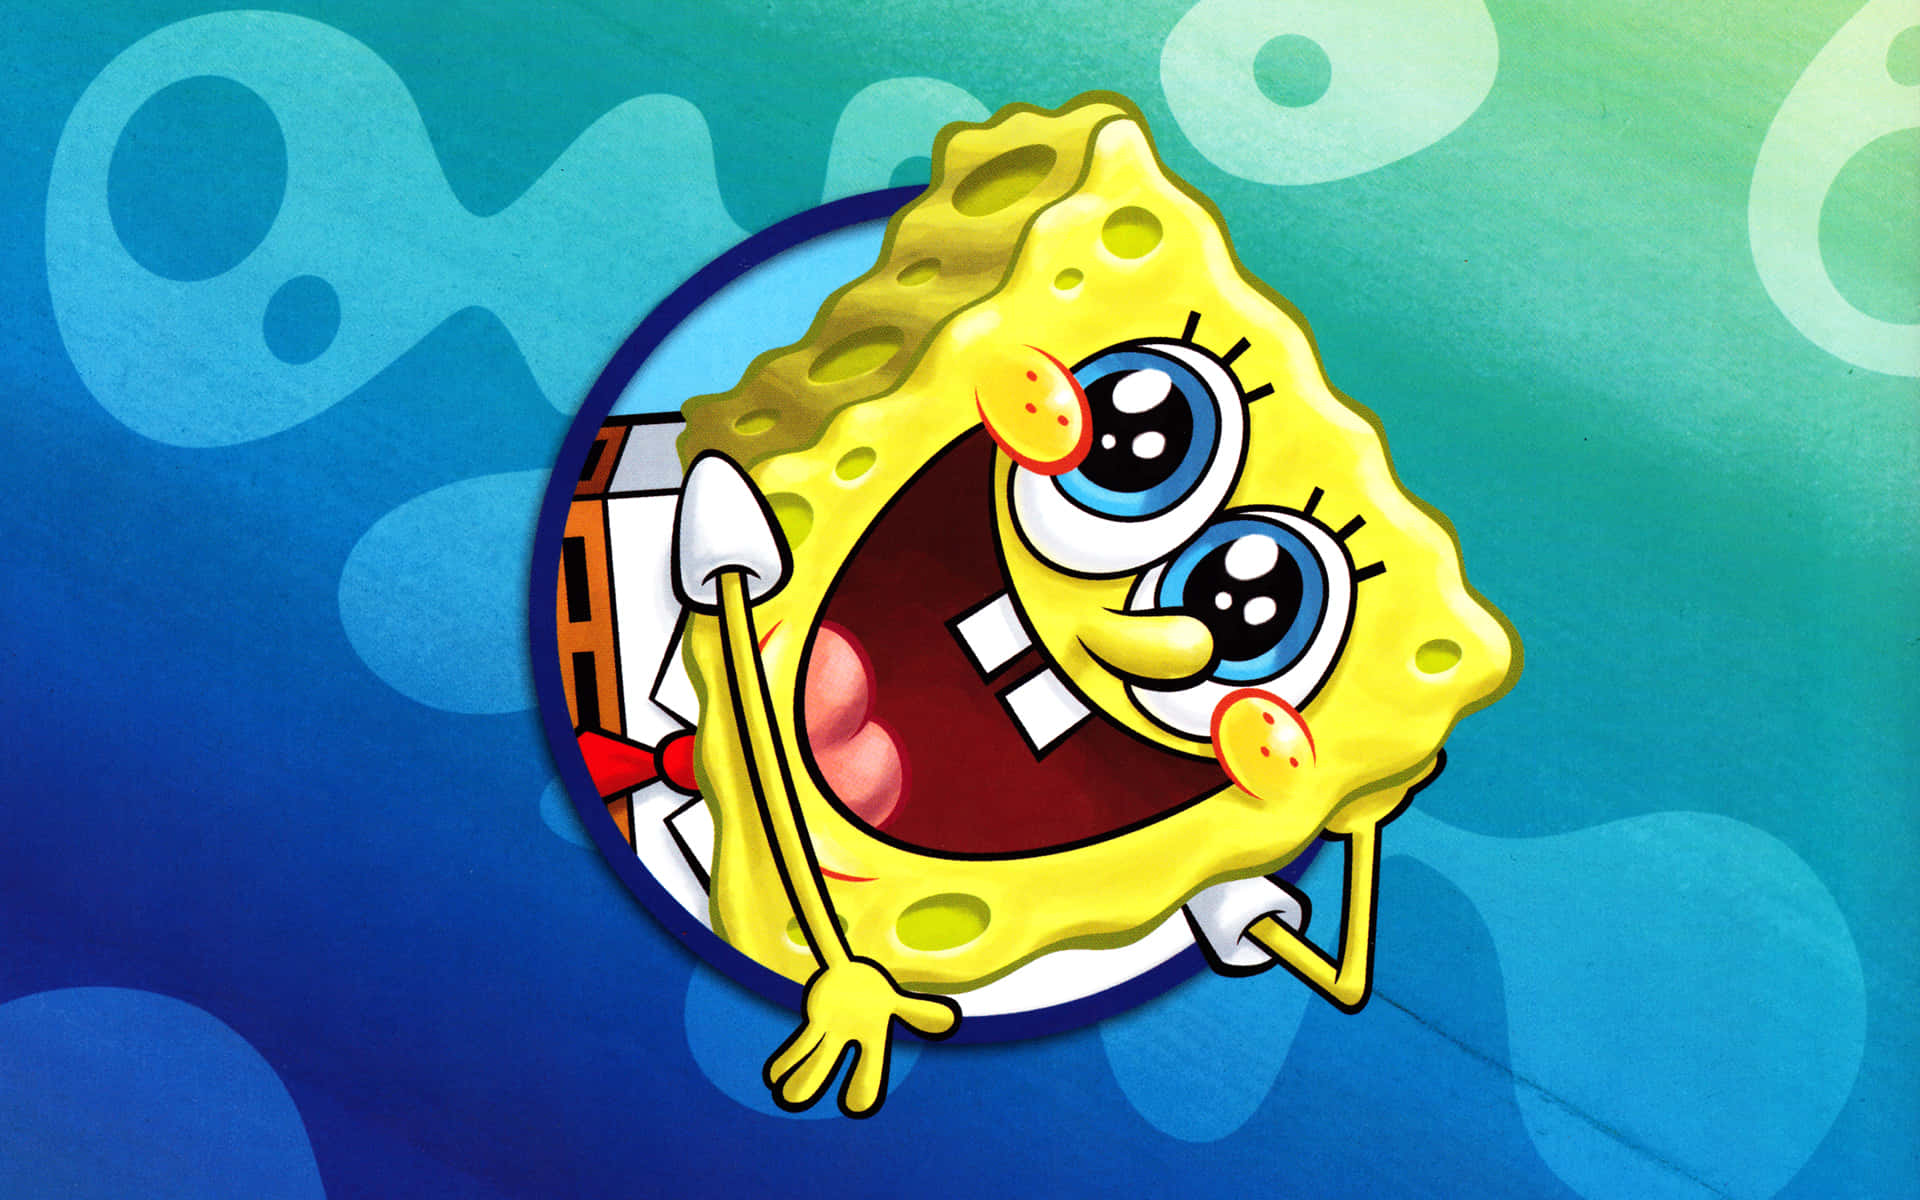 The one and only Spongebob Squarepants!